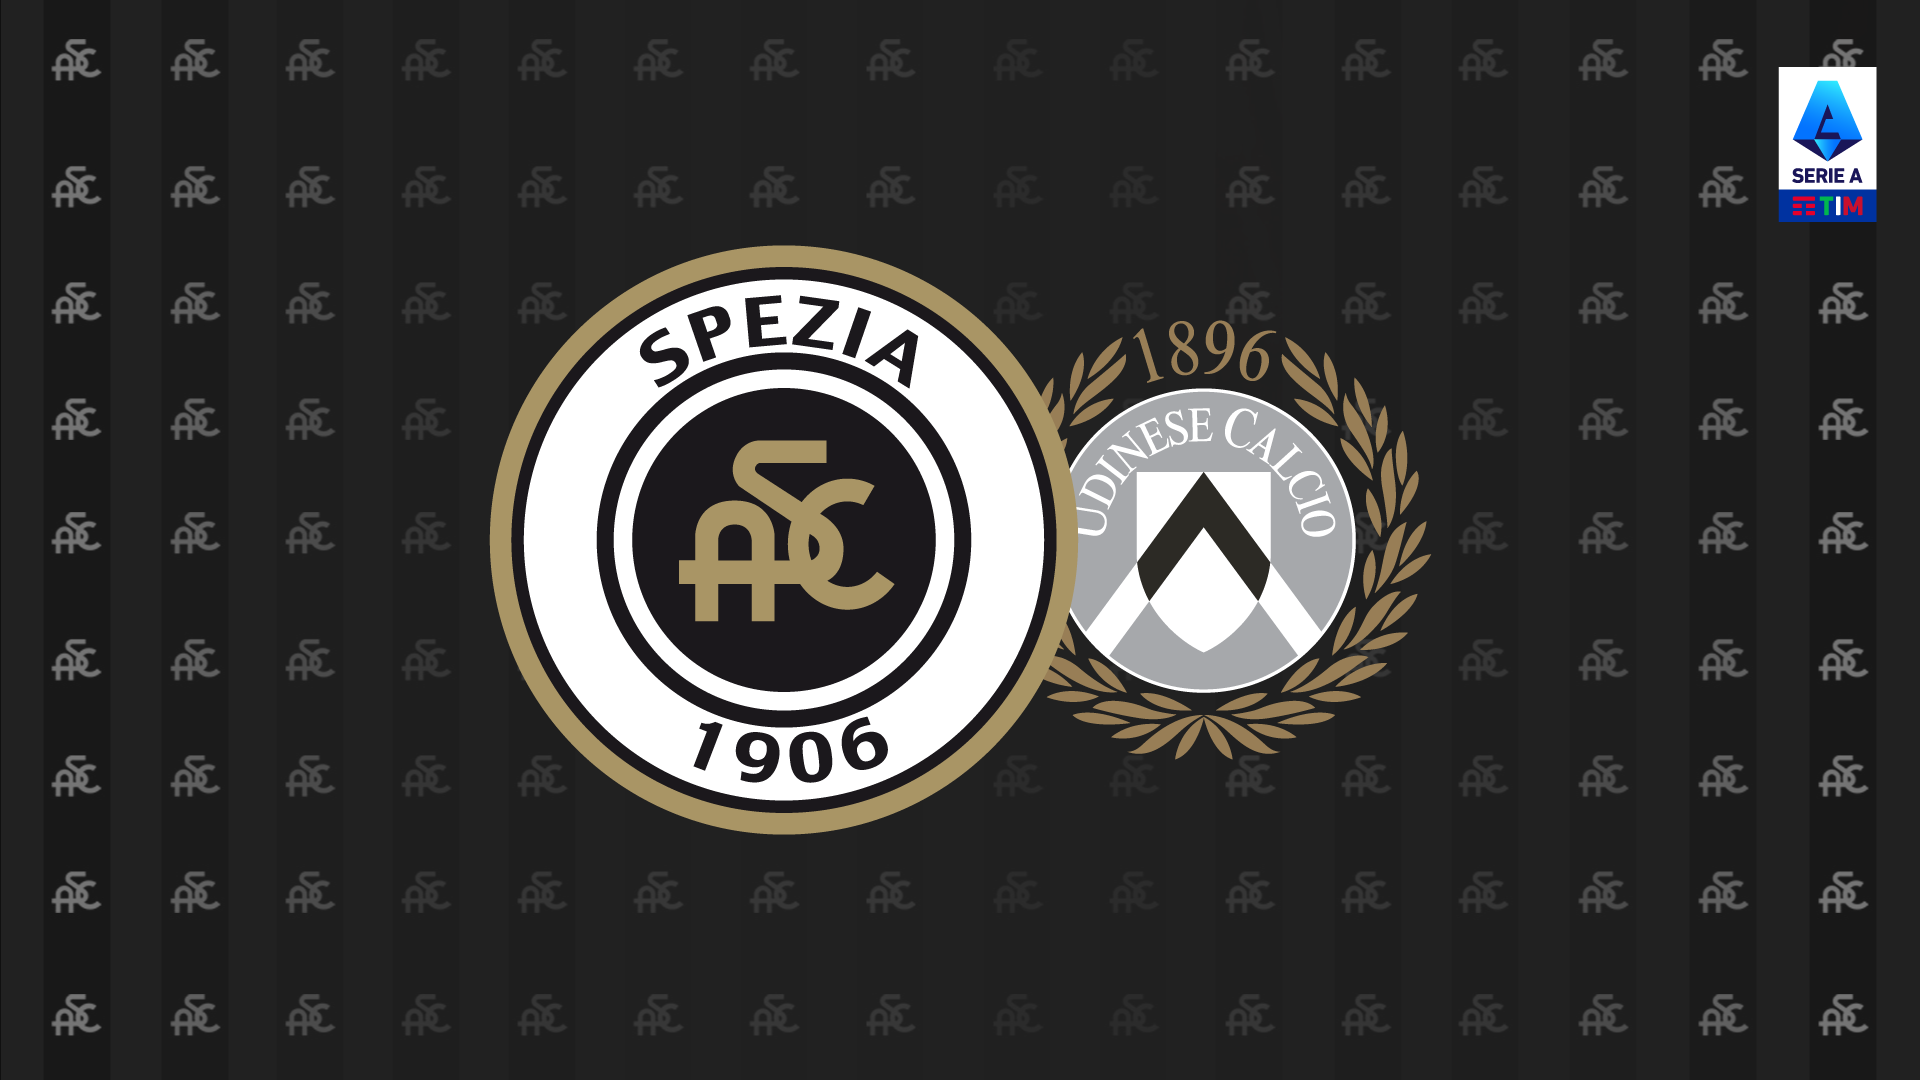 Spezia-Udinese: free tickets for all old subscribers. Free sale from 16:00